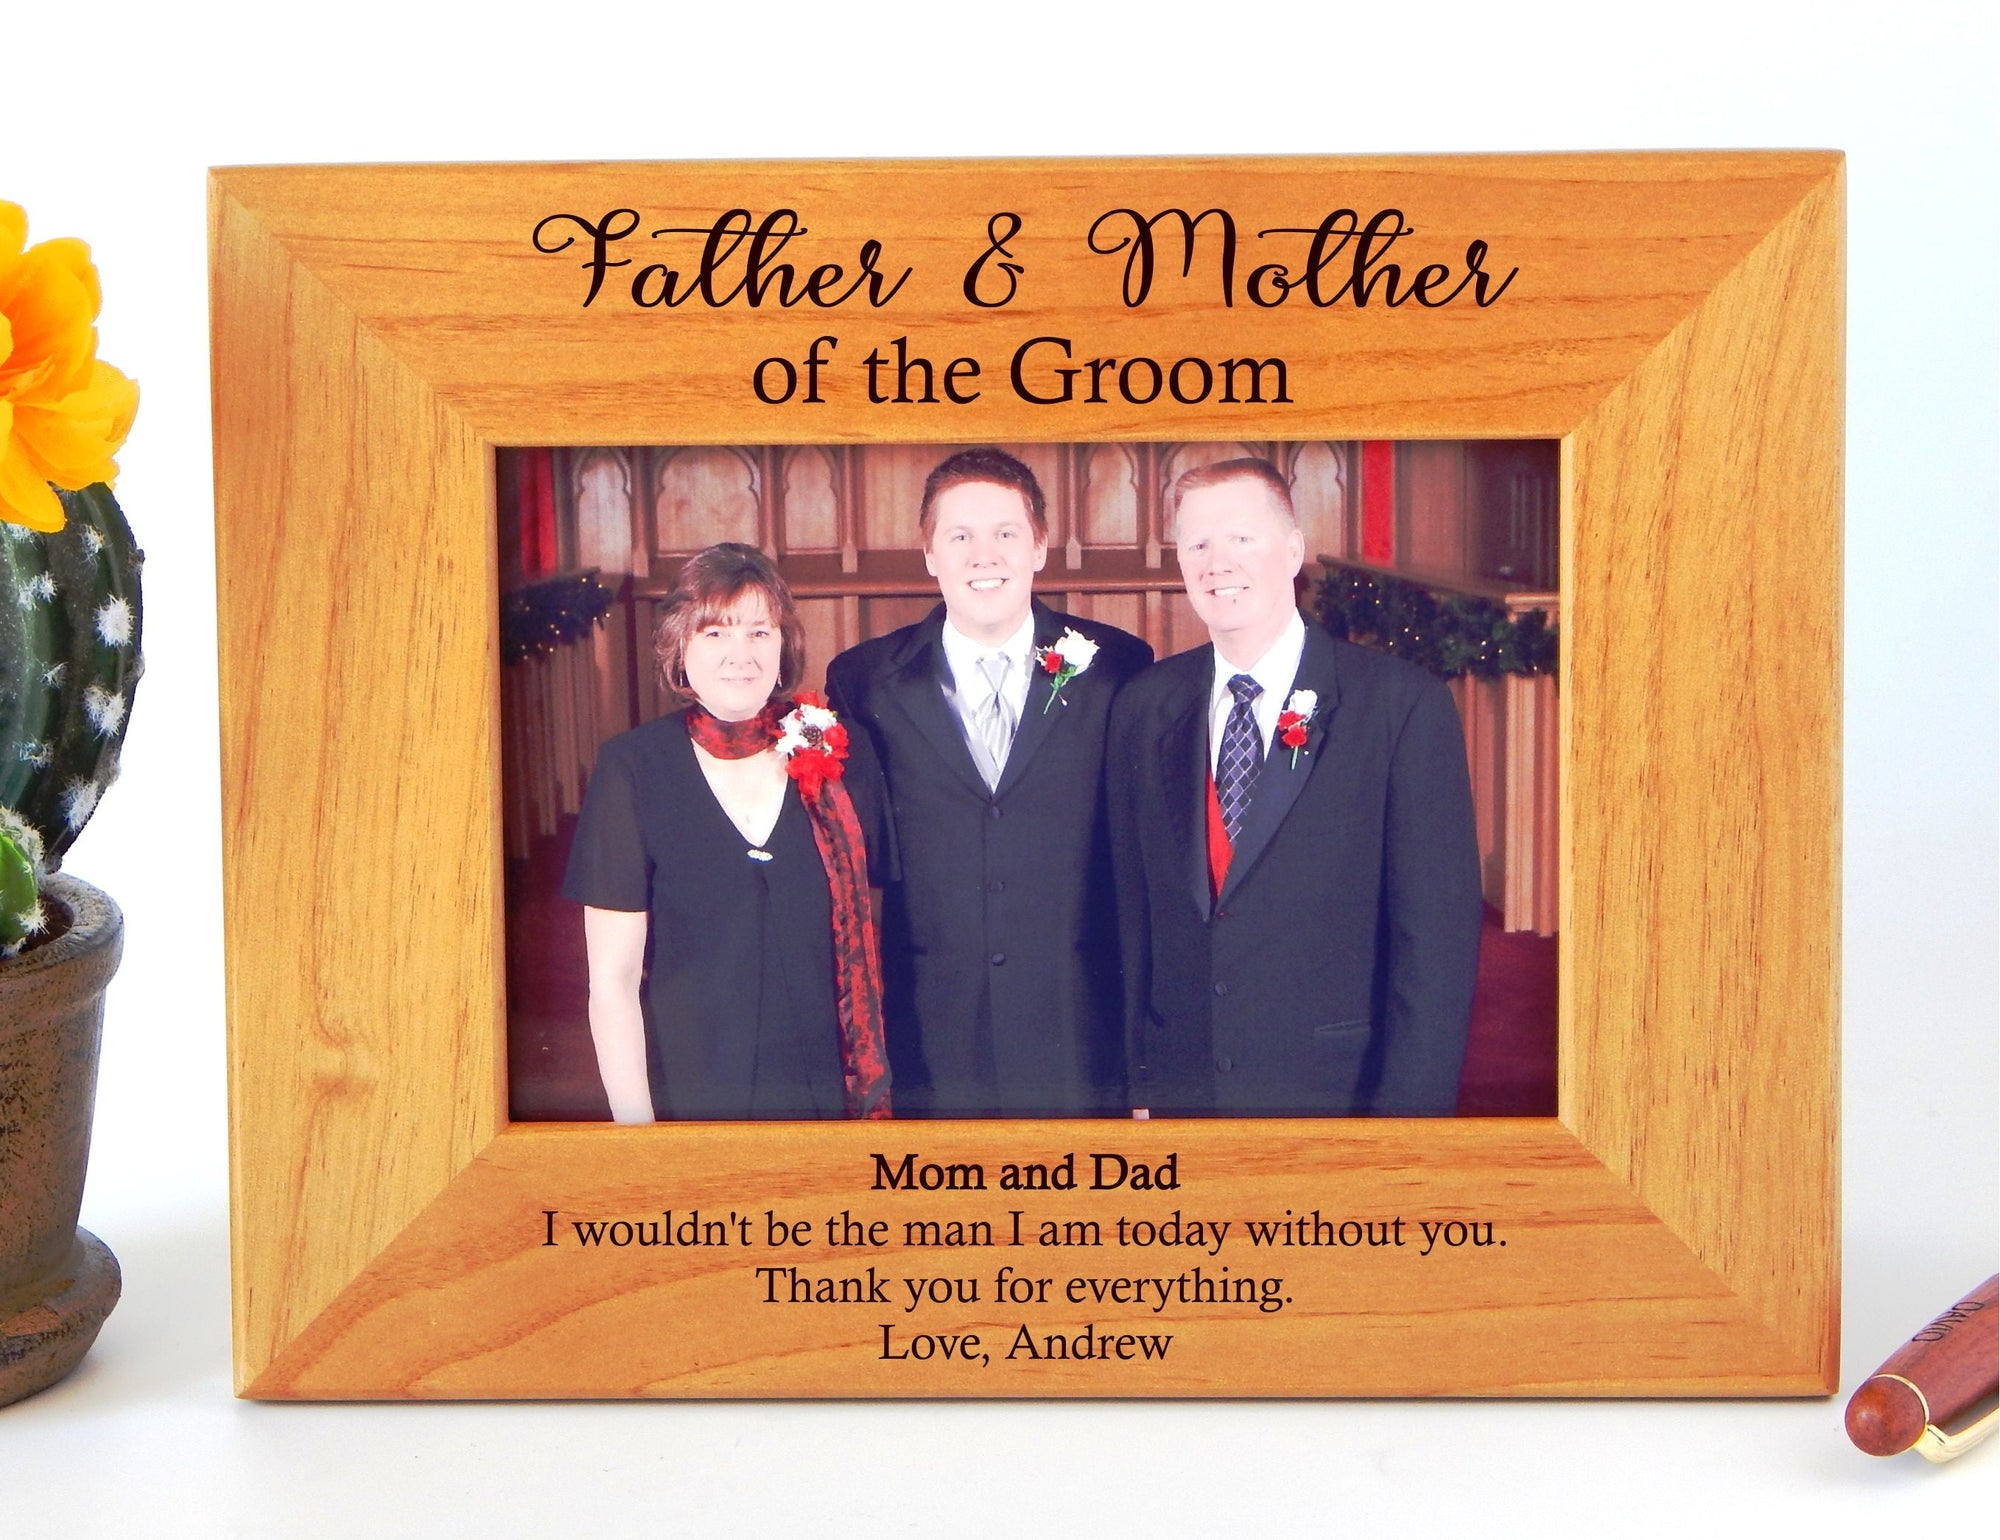 Personalized Picture Frame | Mother of the Bride Gift | Engraved Wedding Frames